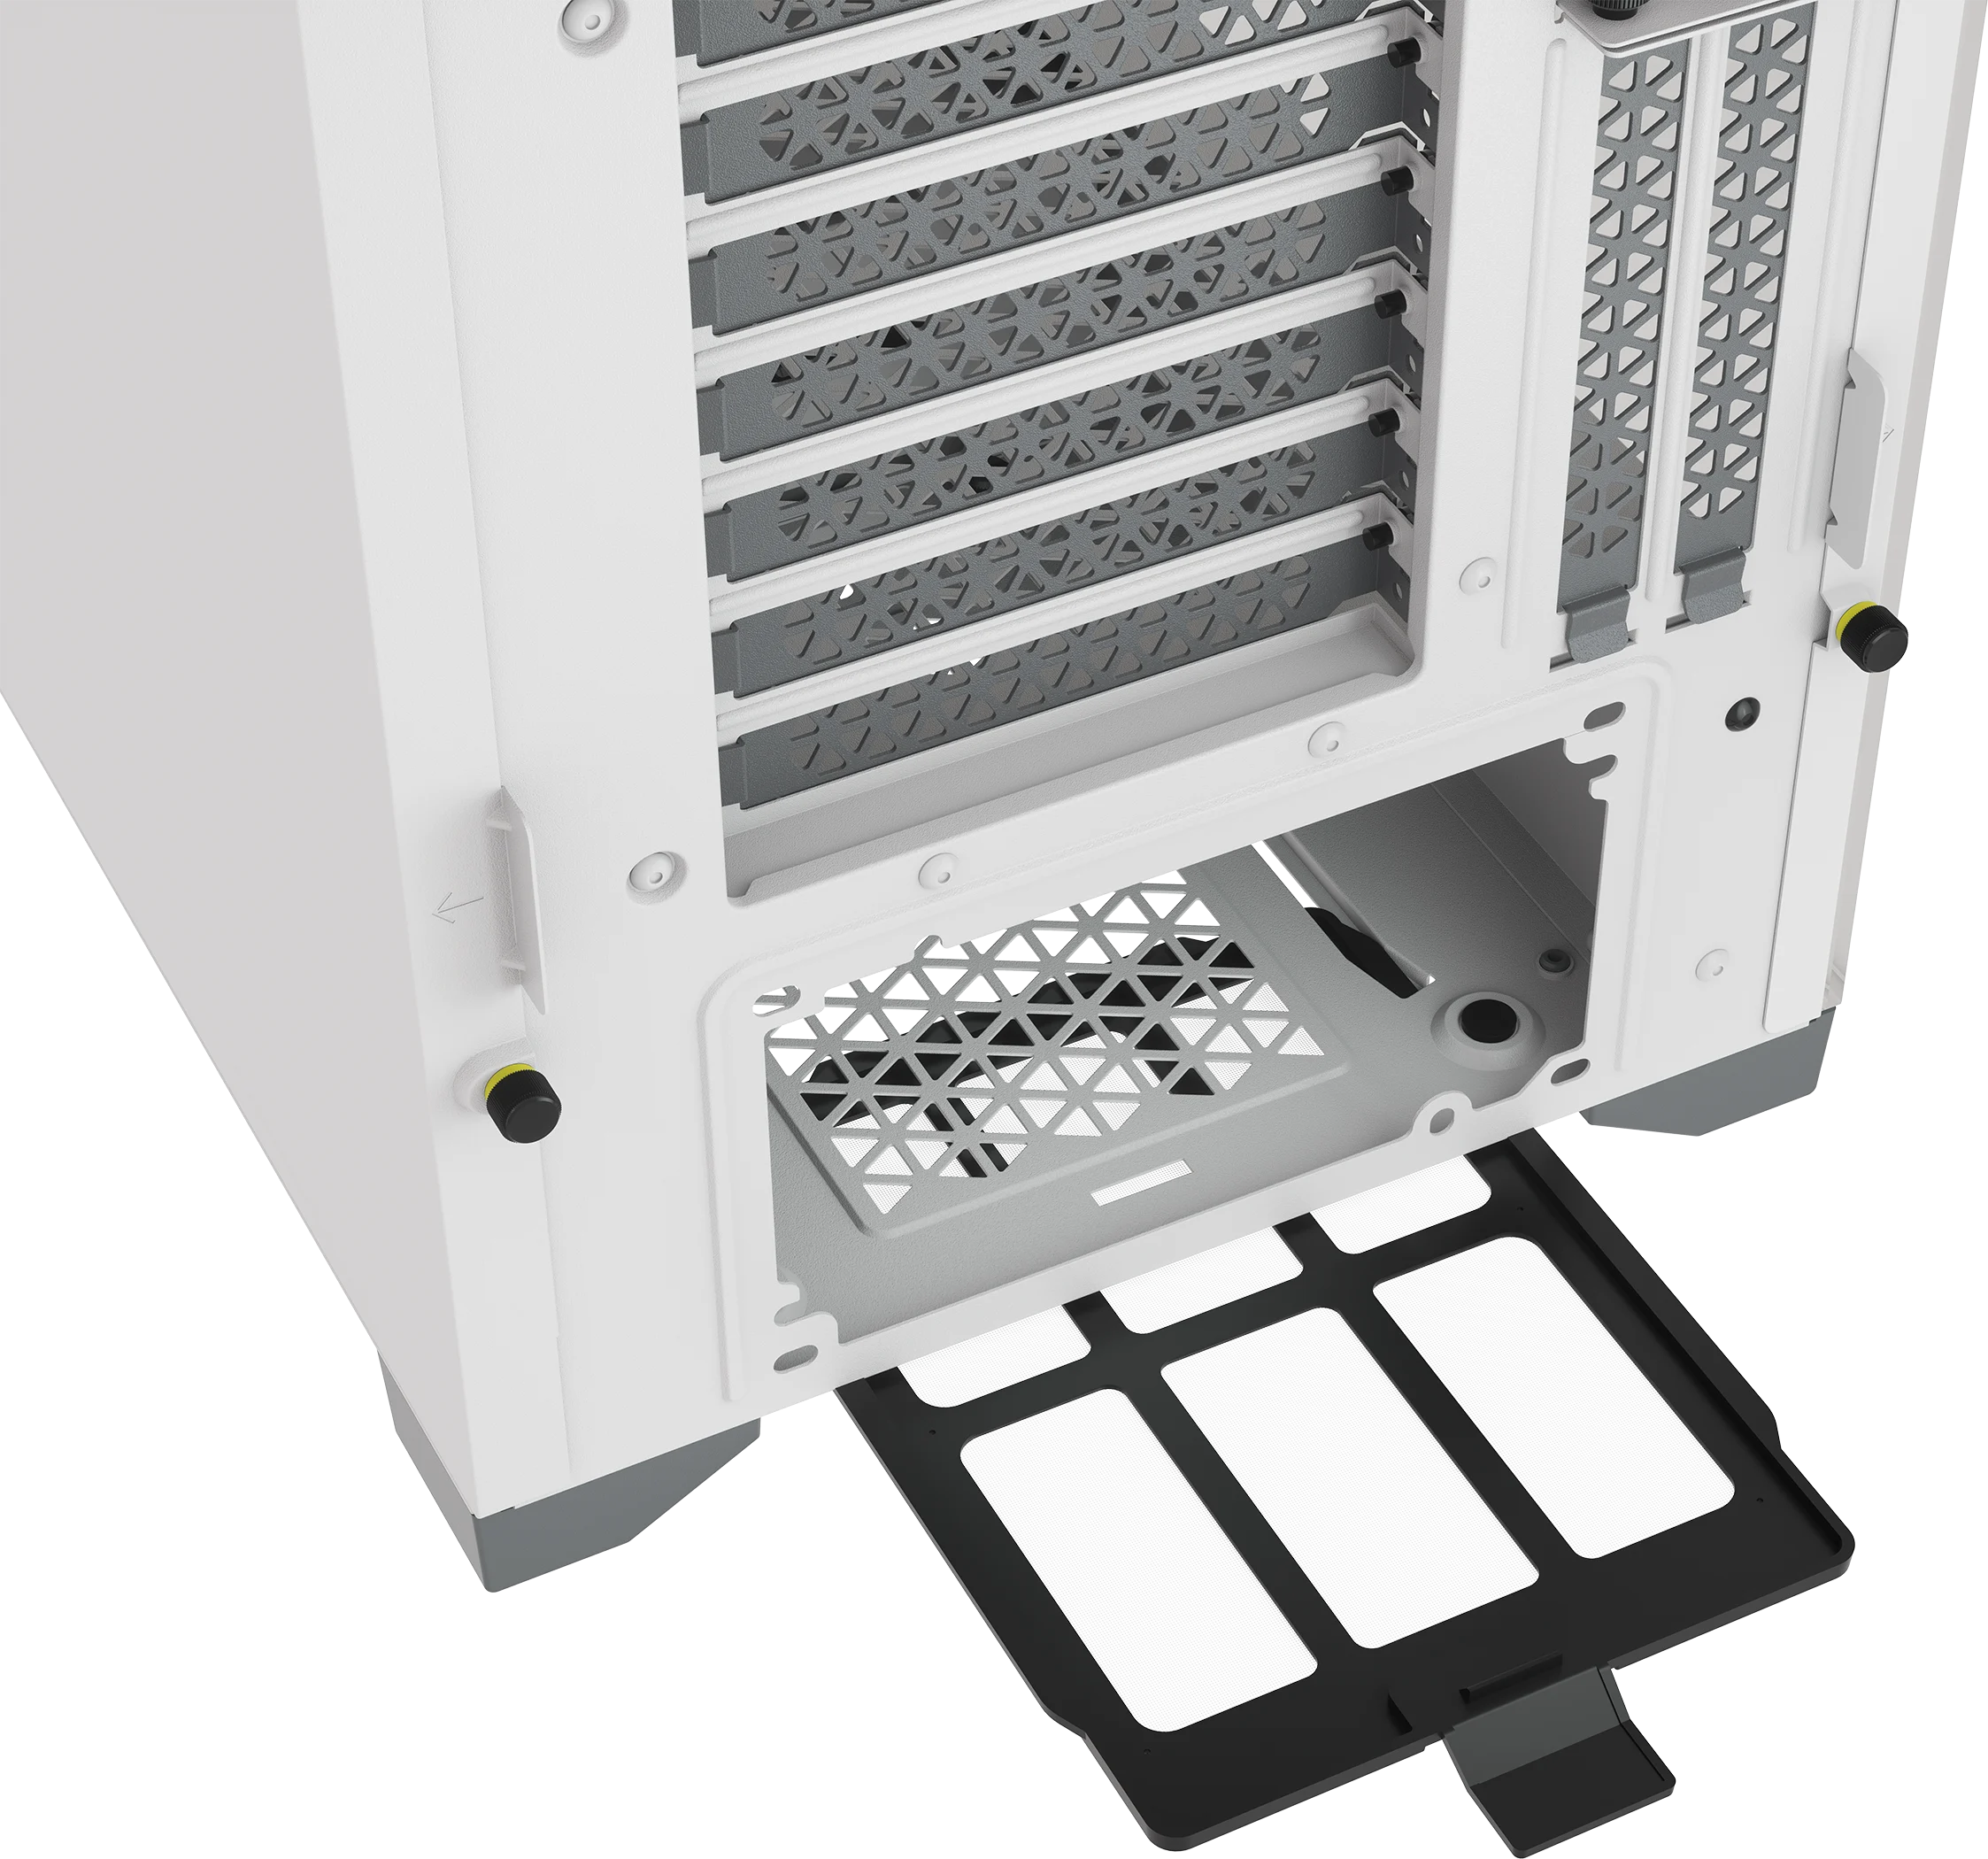 Build a PC for Corsair iCUE 5000D AIRFLOW RGB Tempered Glass without PSU  (CC-9011243-WW) White with compatibility check and price analysis